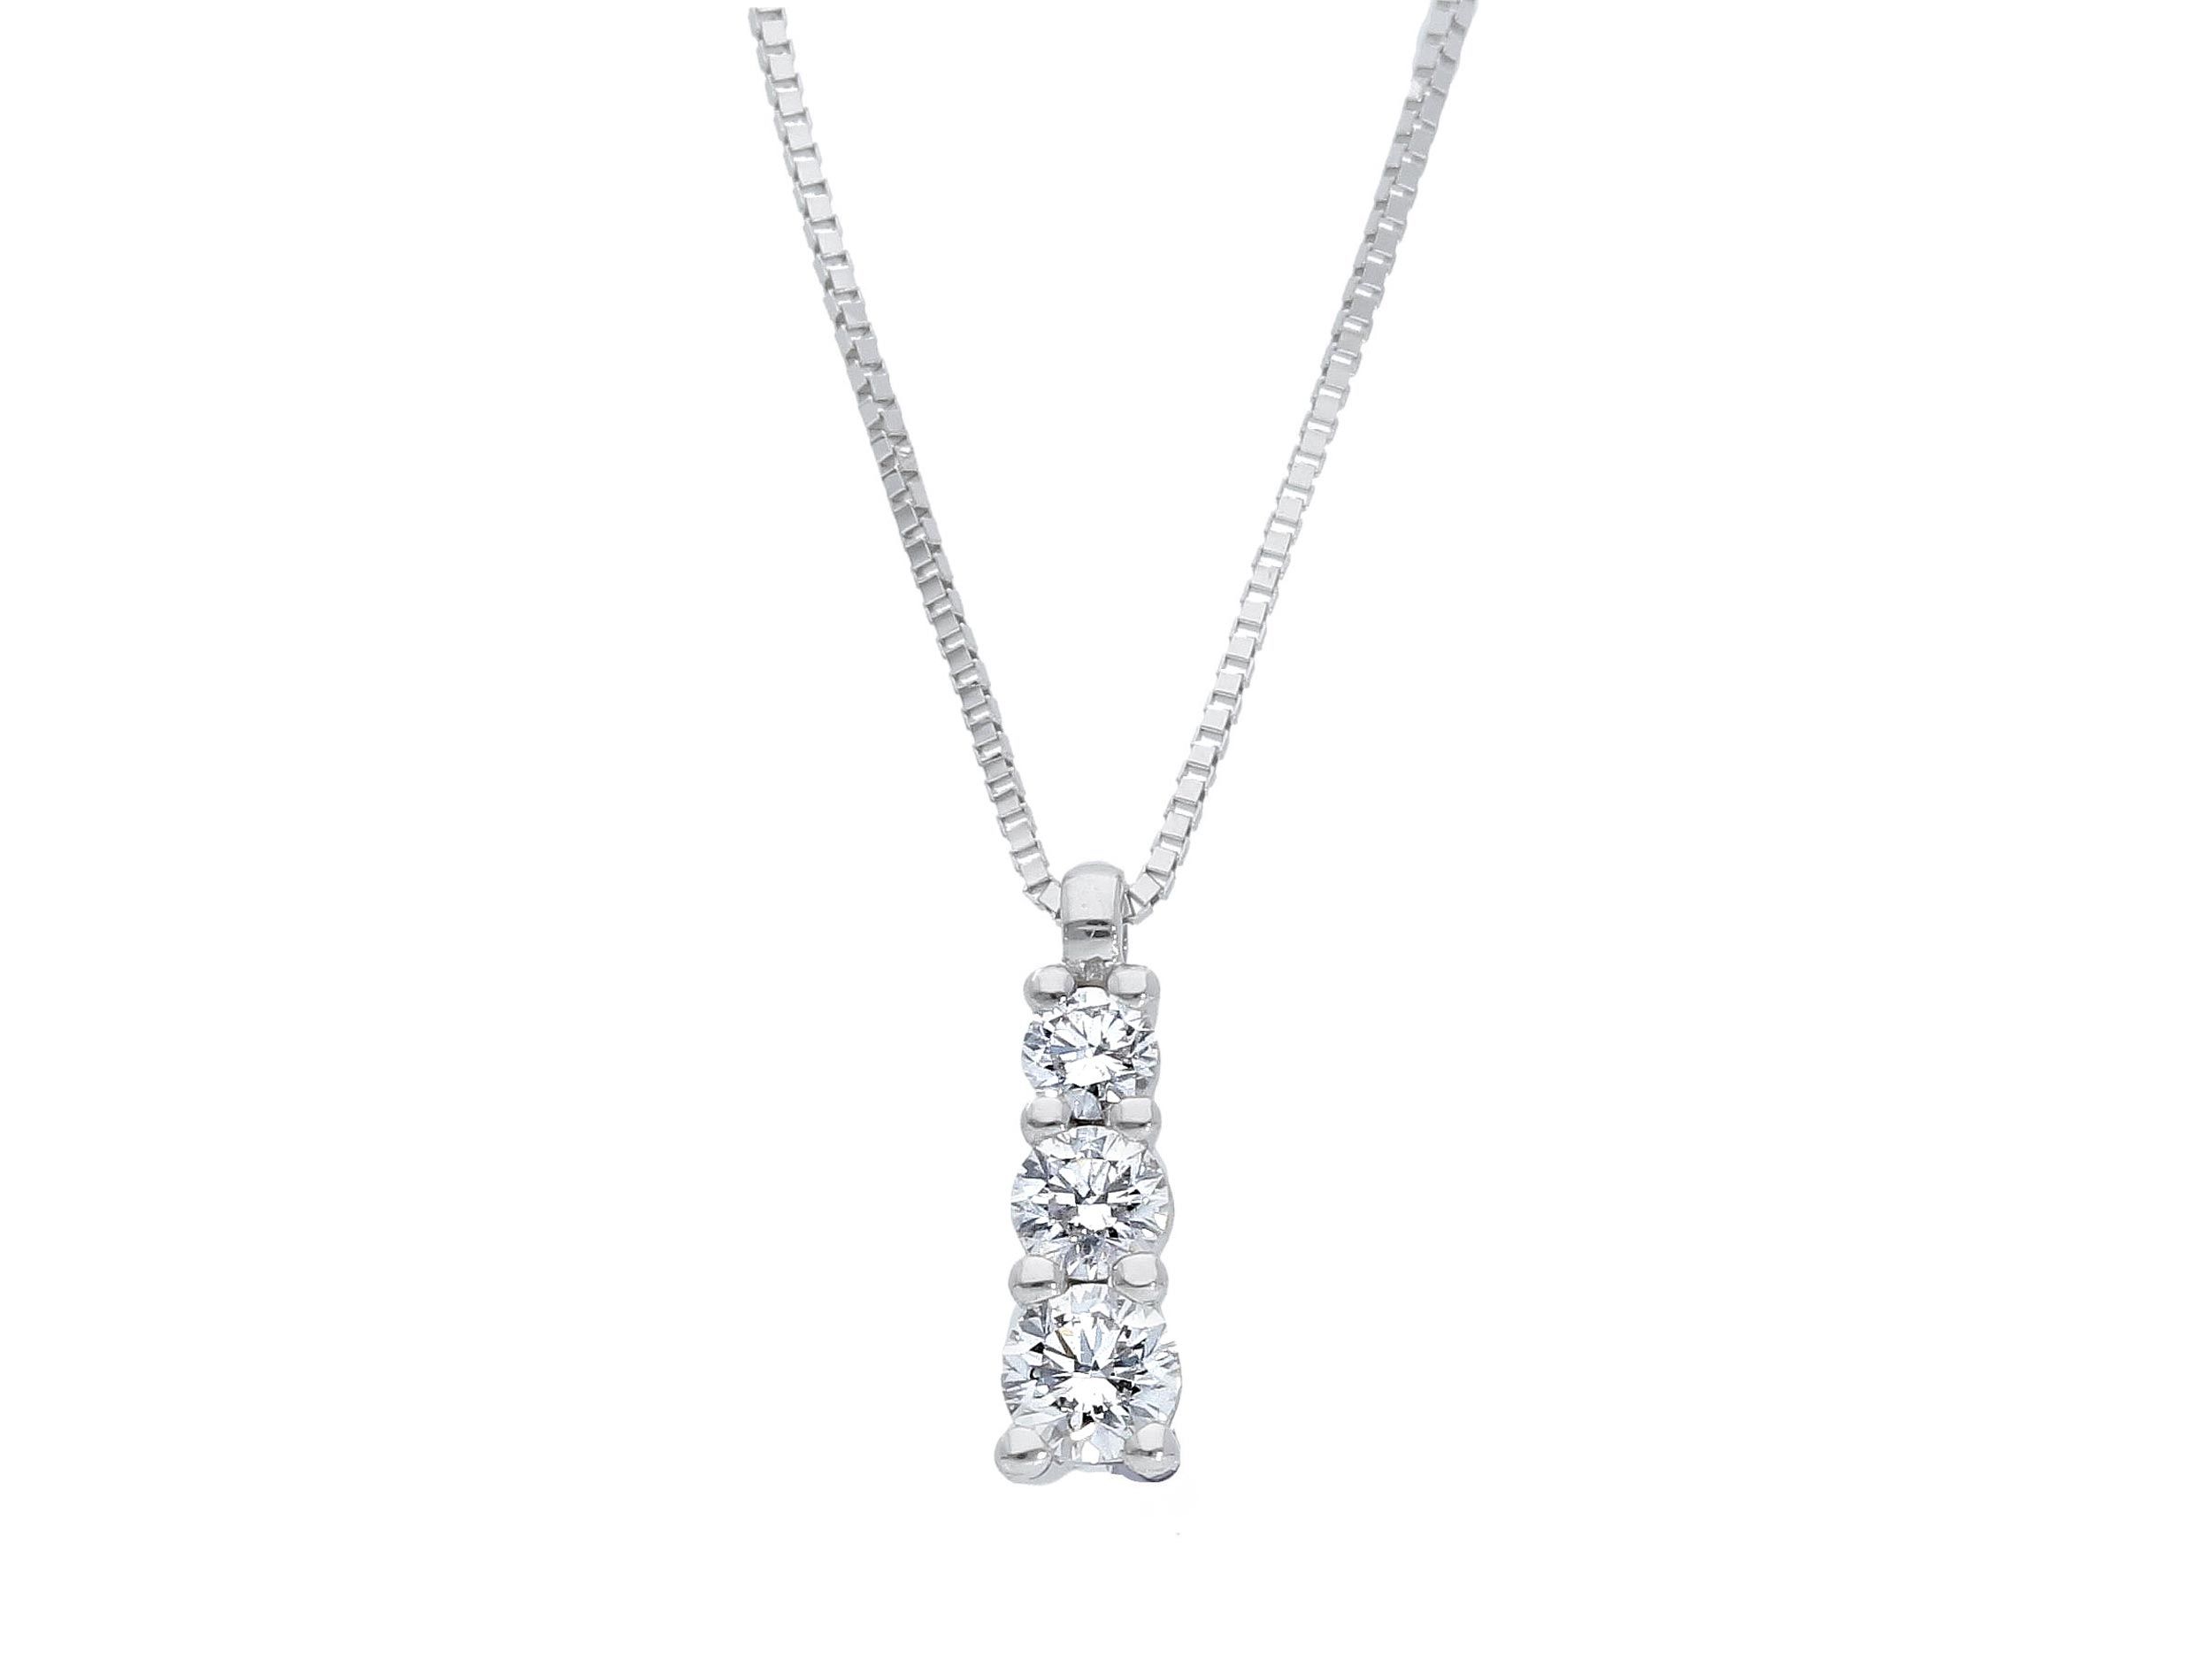  White gold necklace k18 with diamonds (code S225766)